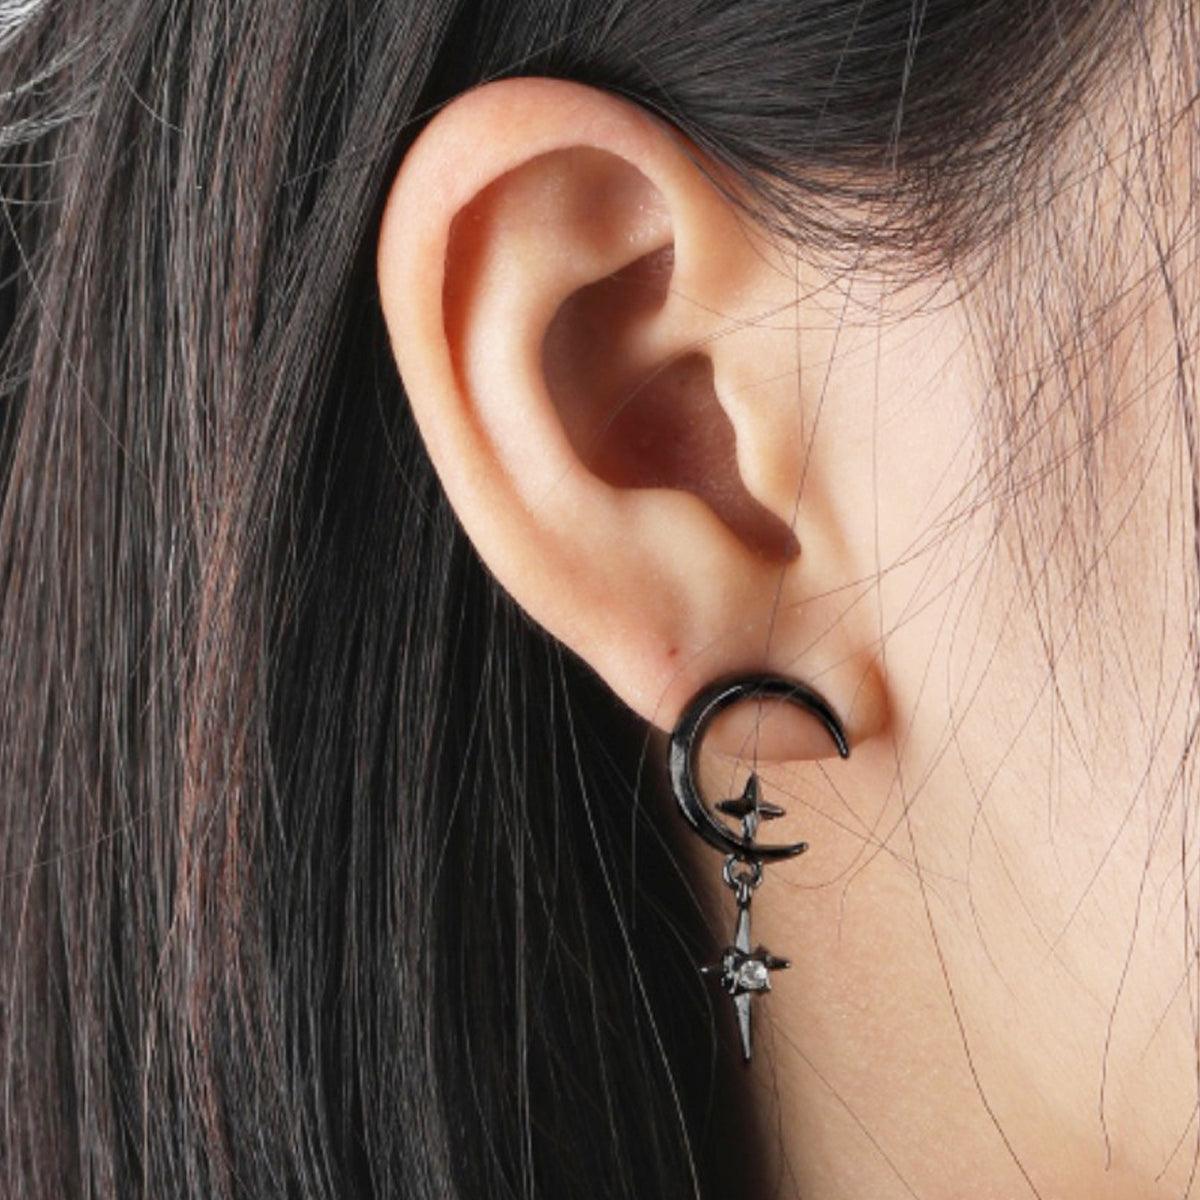 Star and Crescent Moon Earrings - Aesthetic Clothes Shop